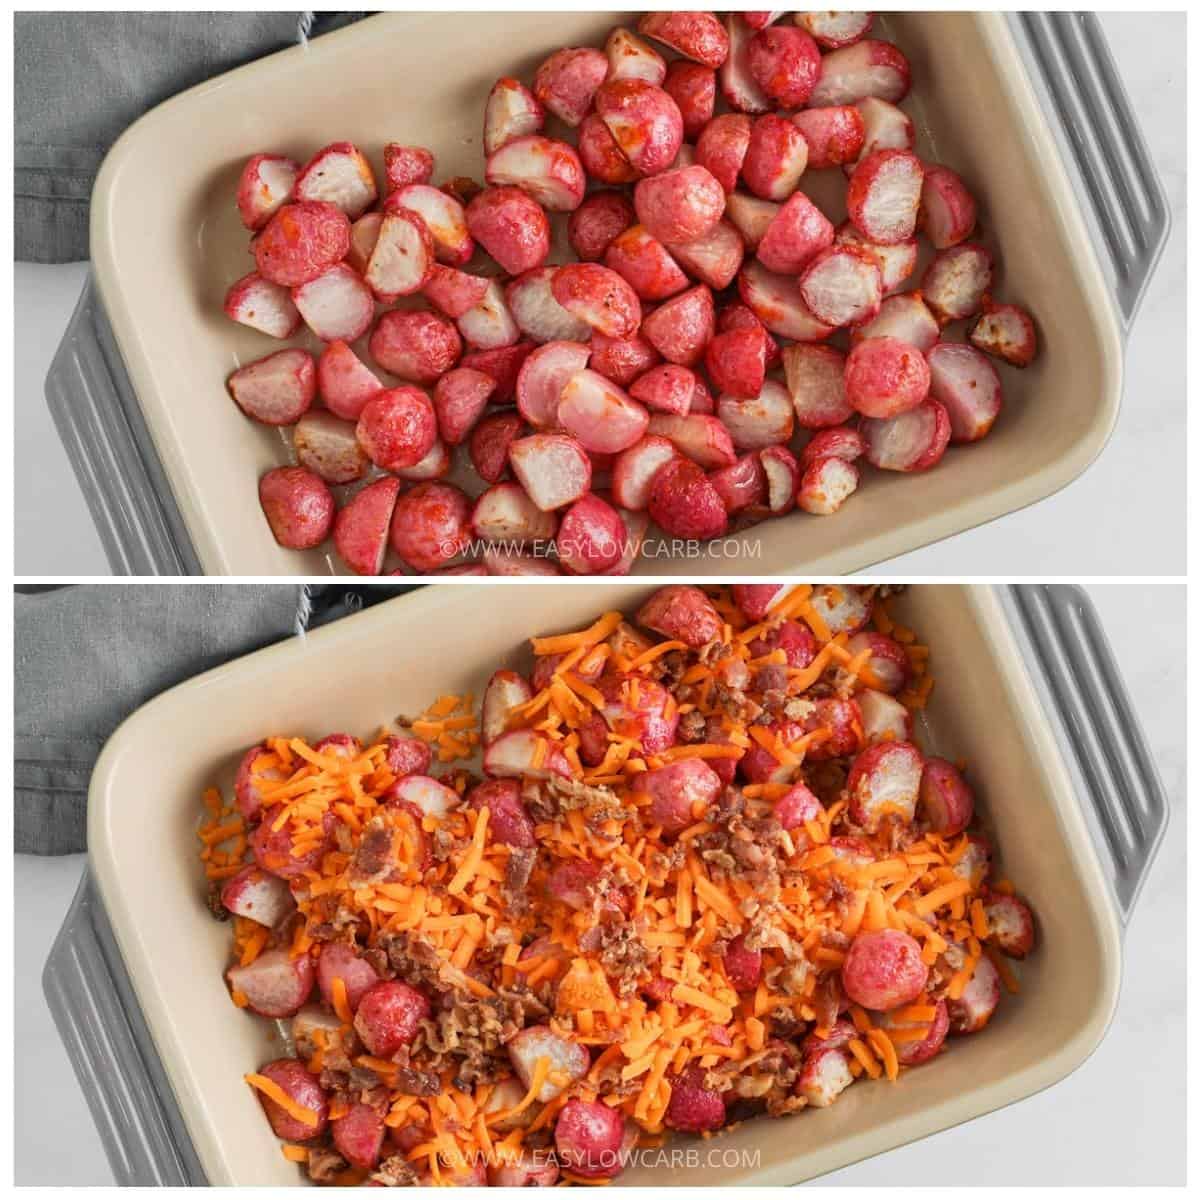 process of adding ingredients to dish to make Loaded Baked Radishes Casserole